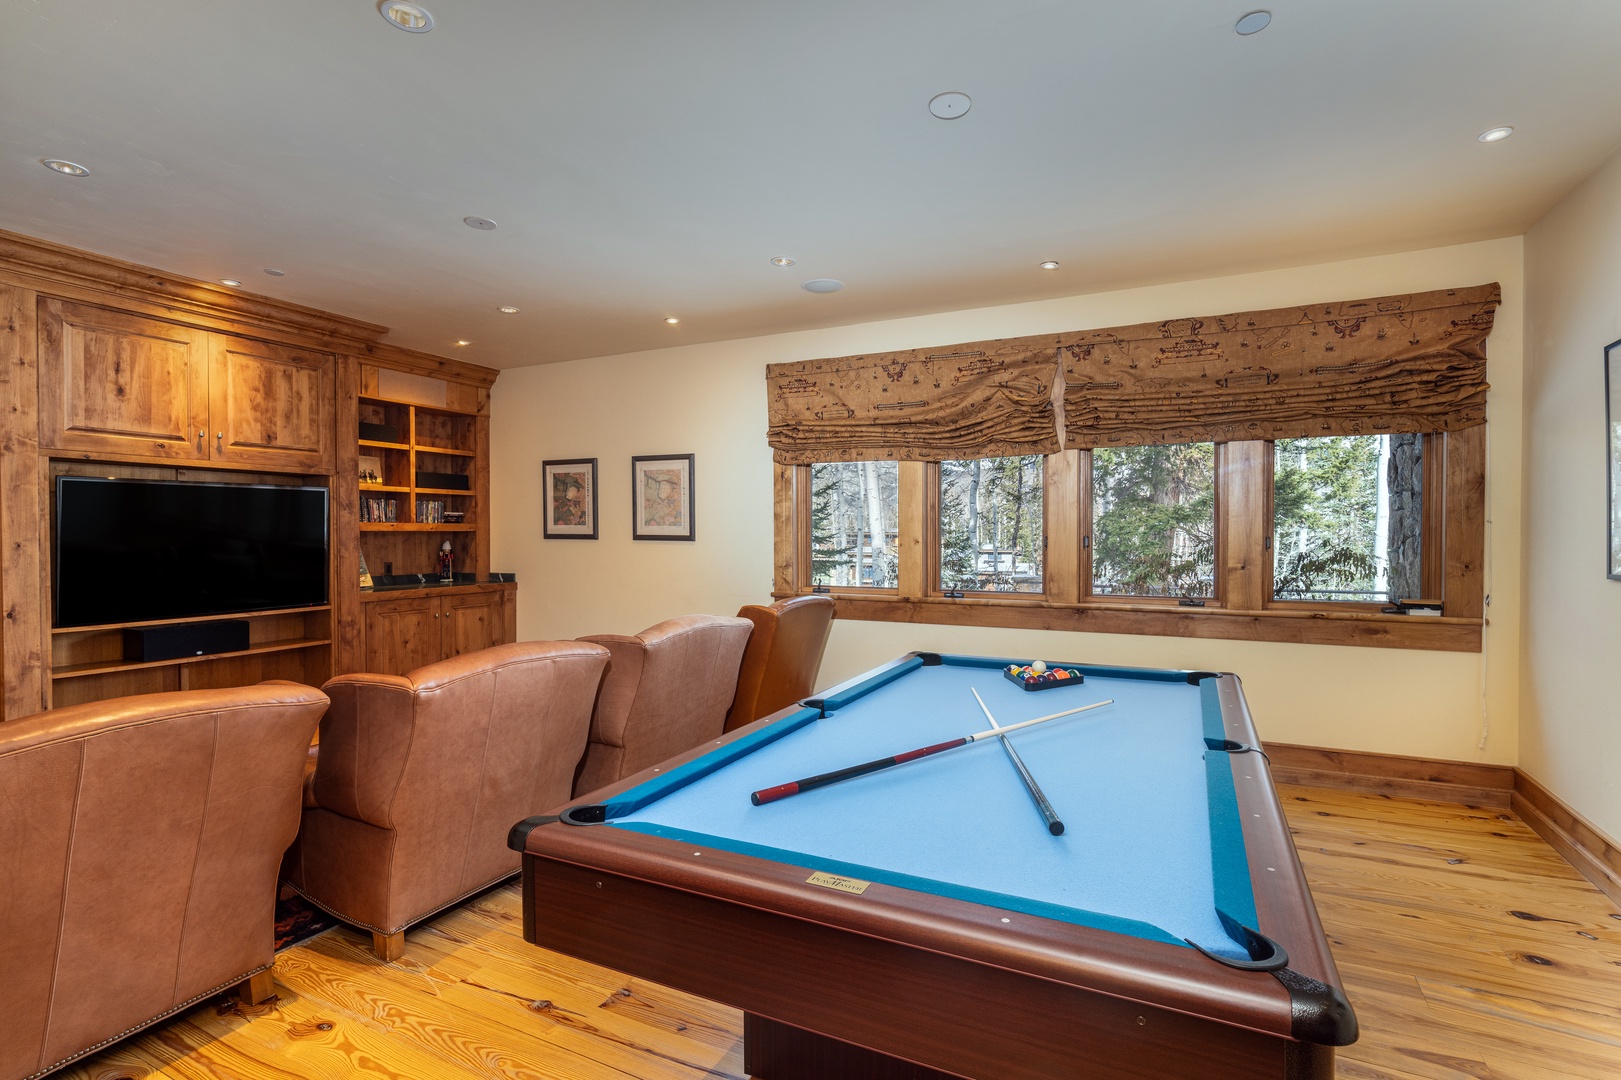 Lower media room with full size pool table